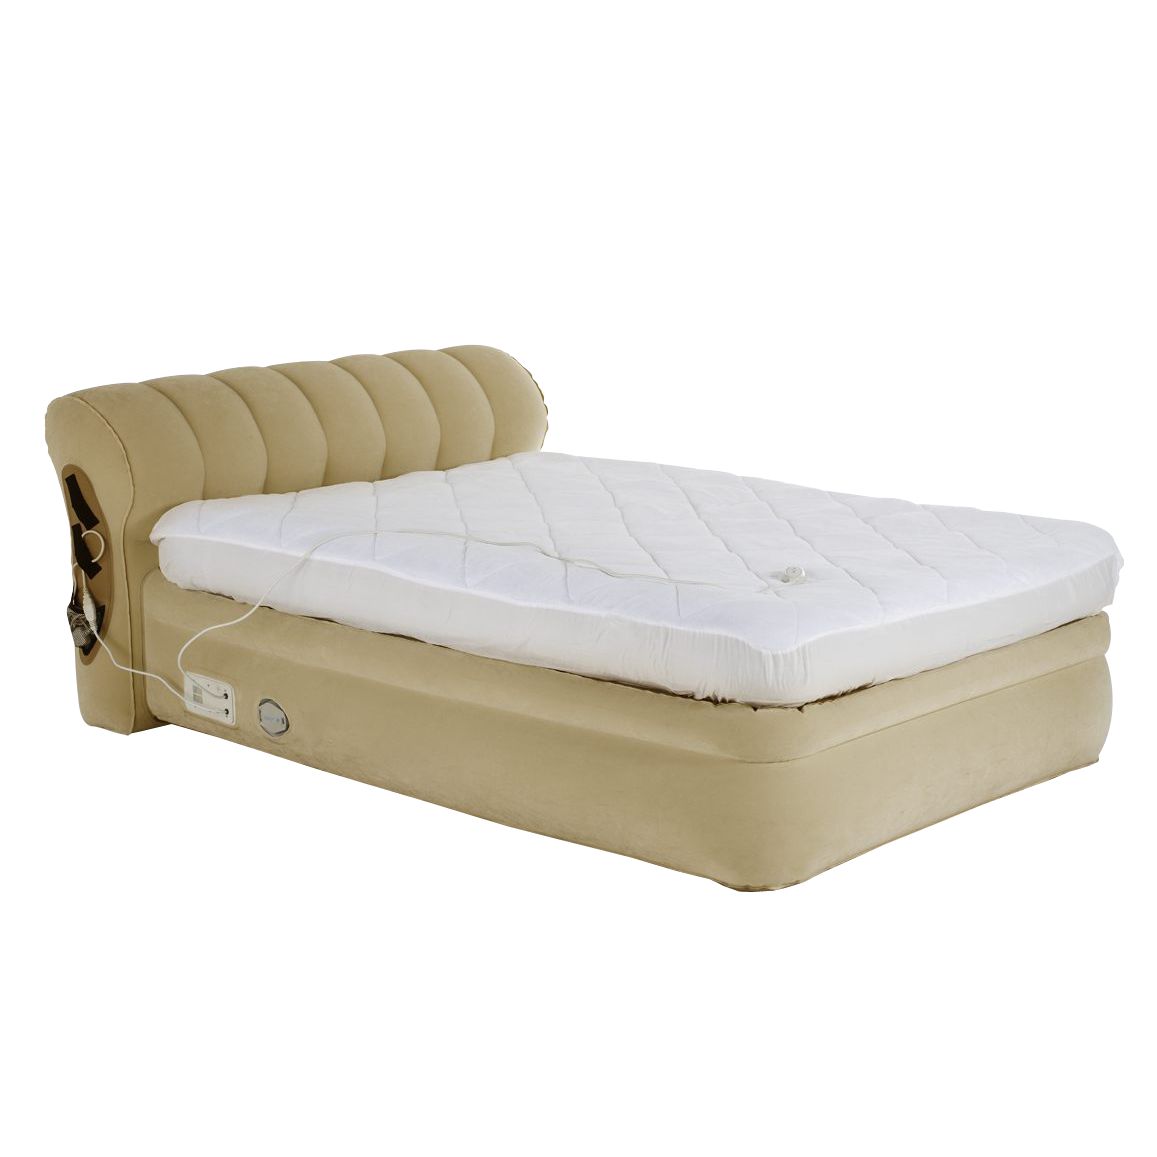 AeroBed Platinum Raised Inflatable Guest Beds with Headboard at John Lewis